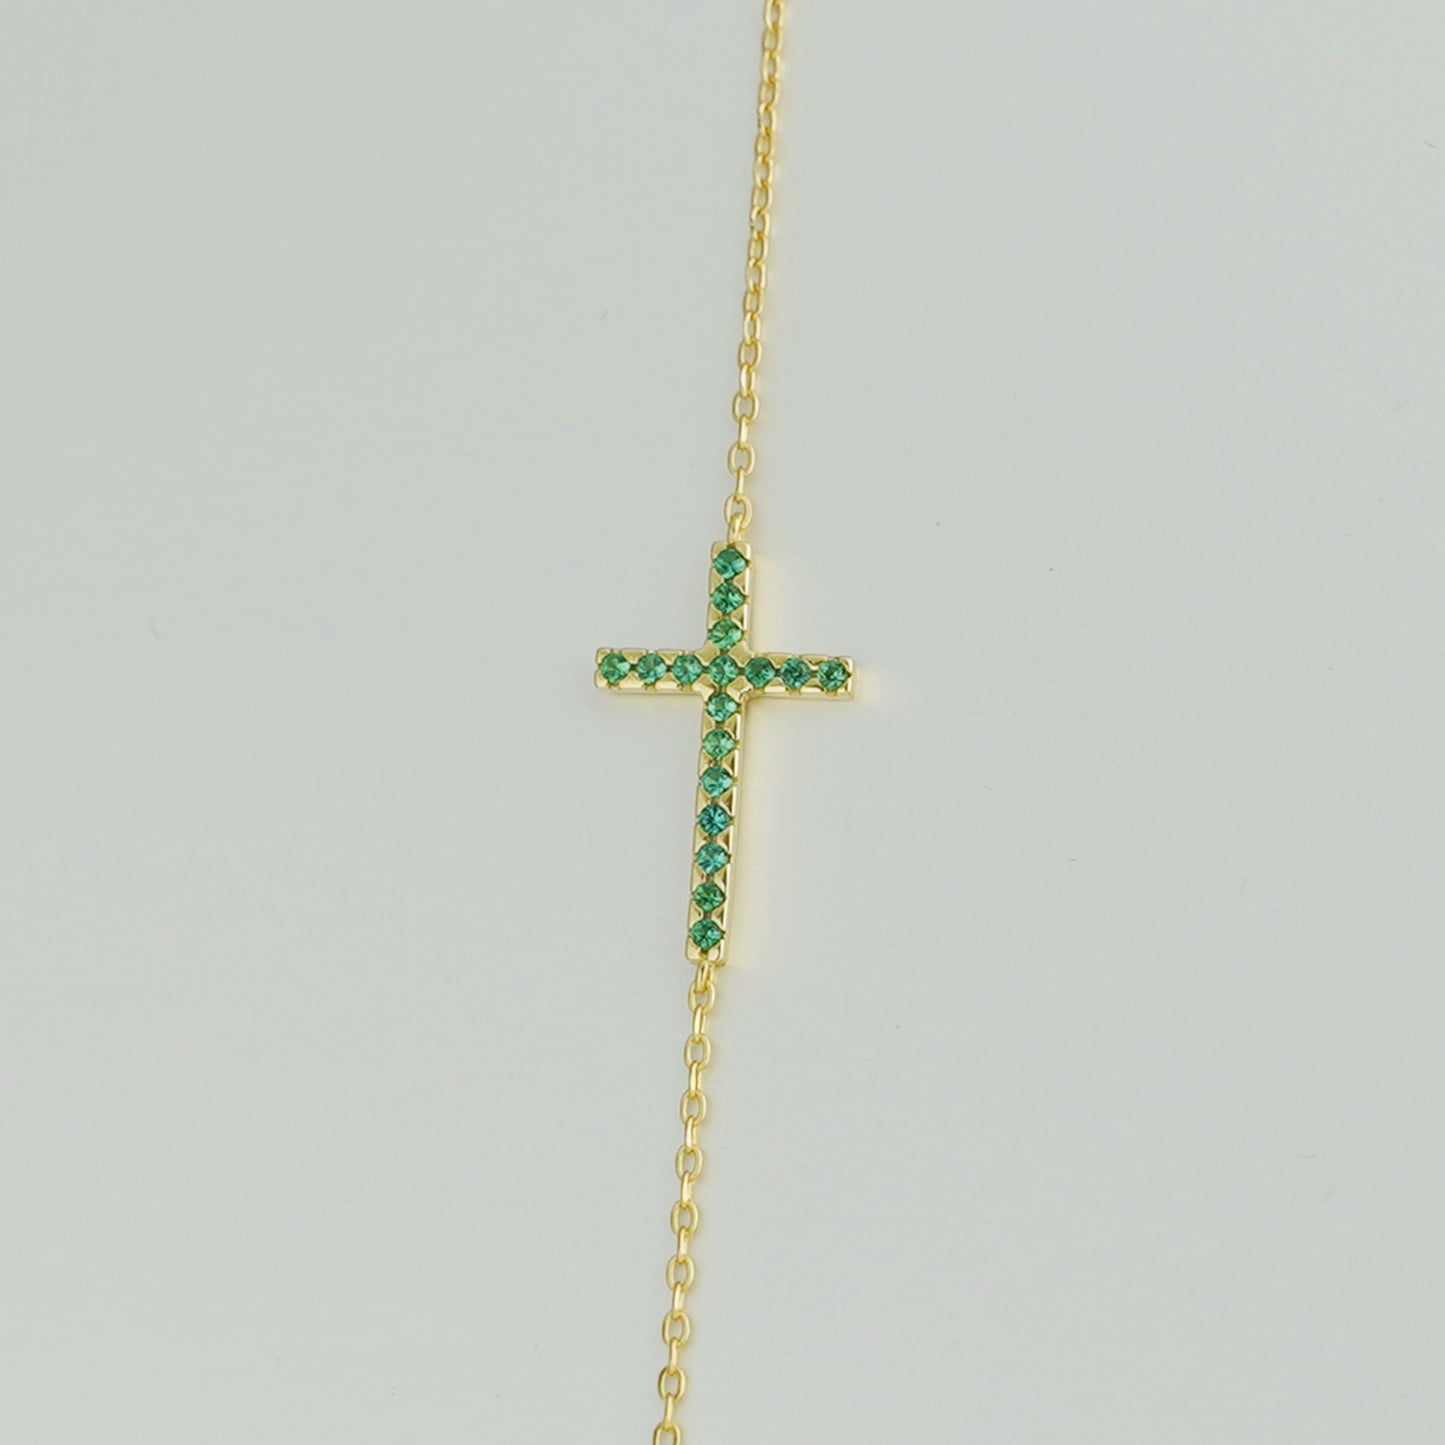 Gold-Plated Sterling Silver Green CZ Cross Pendant Necklace